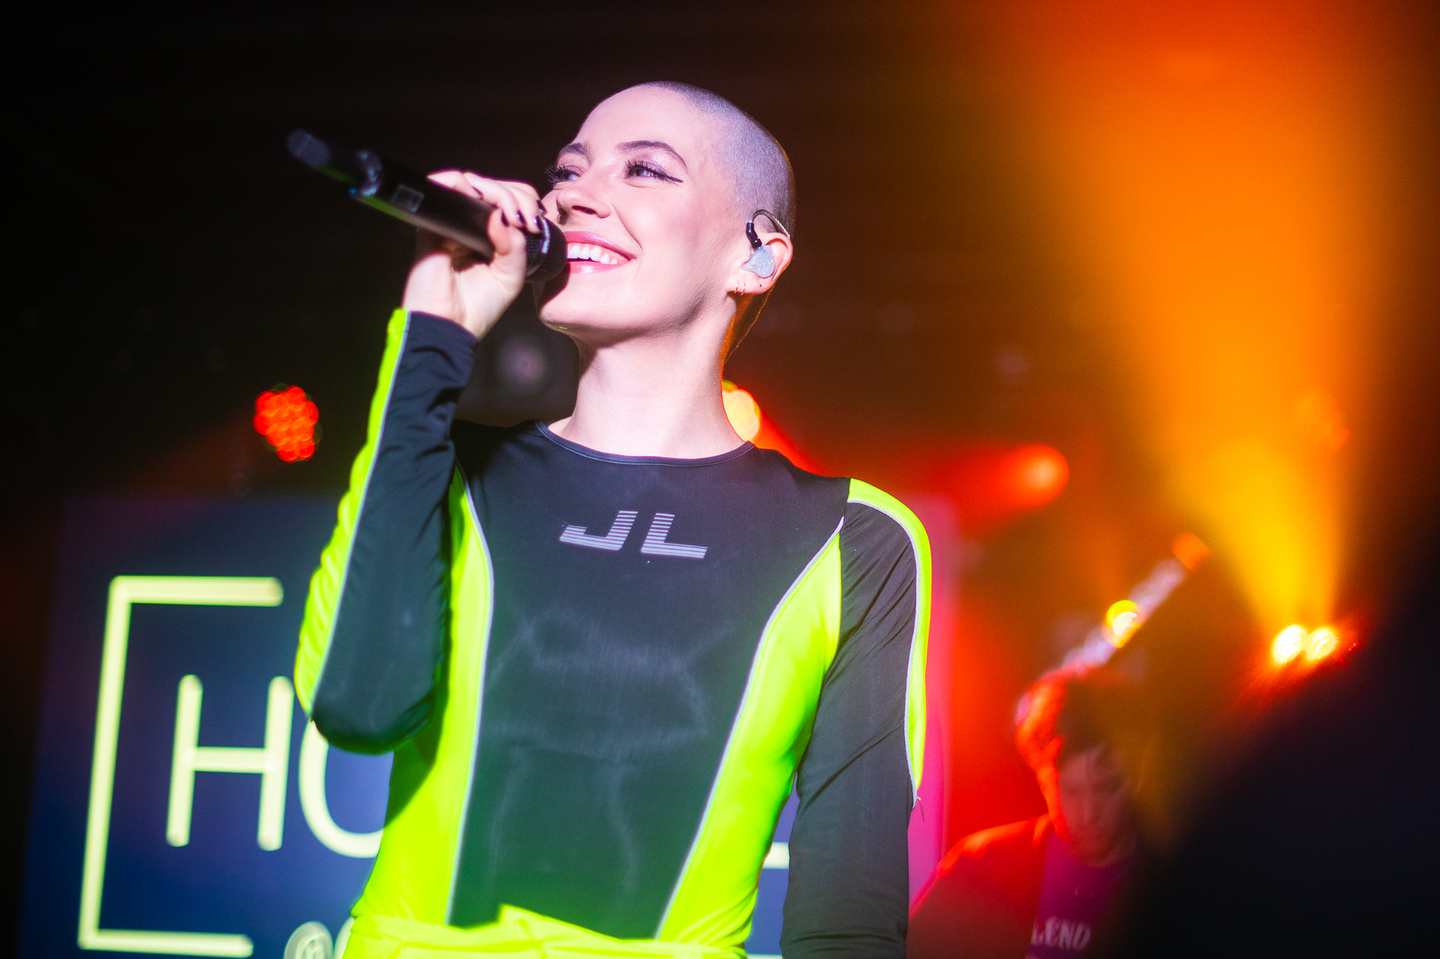 Bishop Briggs at Capital One House at Antone's. Photo by Adam Kissick